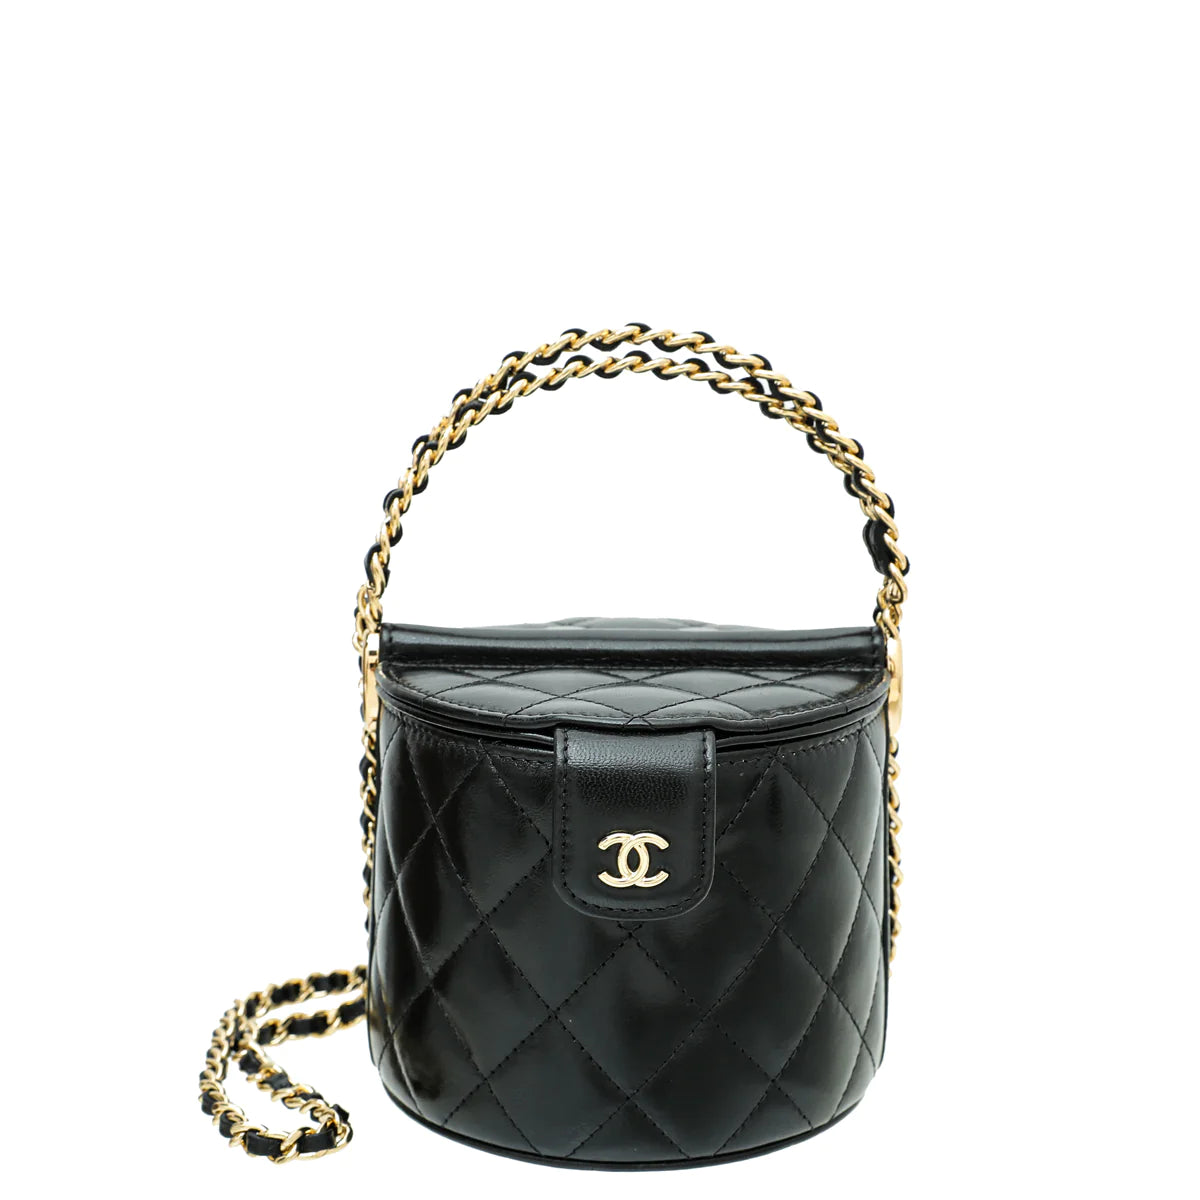 HOT* Chanel Purple CC Vanity Case Bag in Caviar Leather with